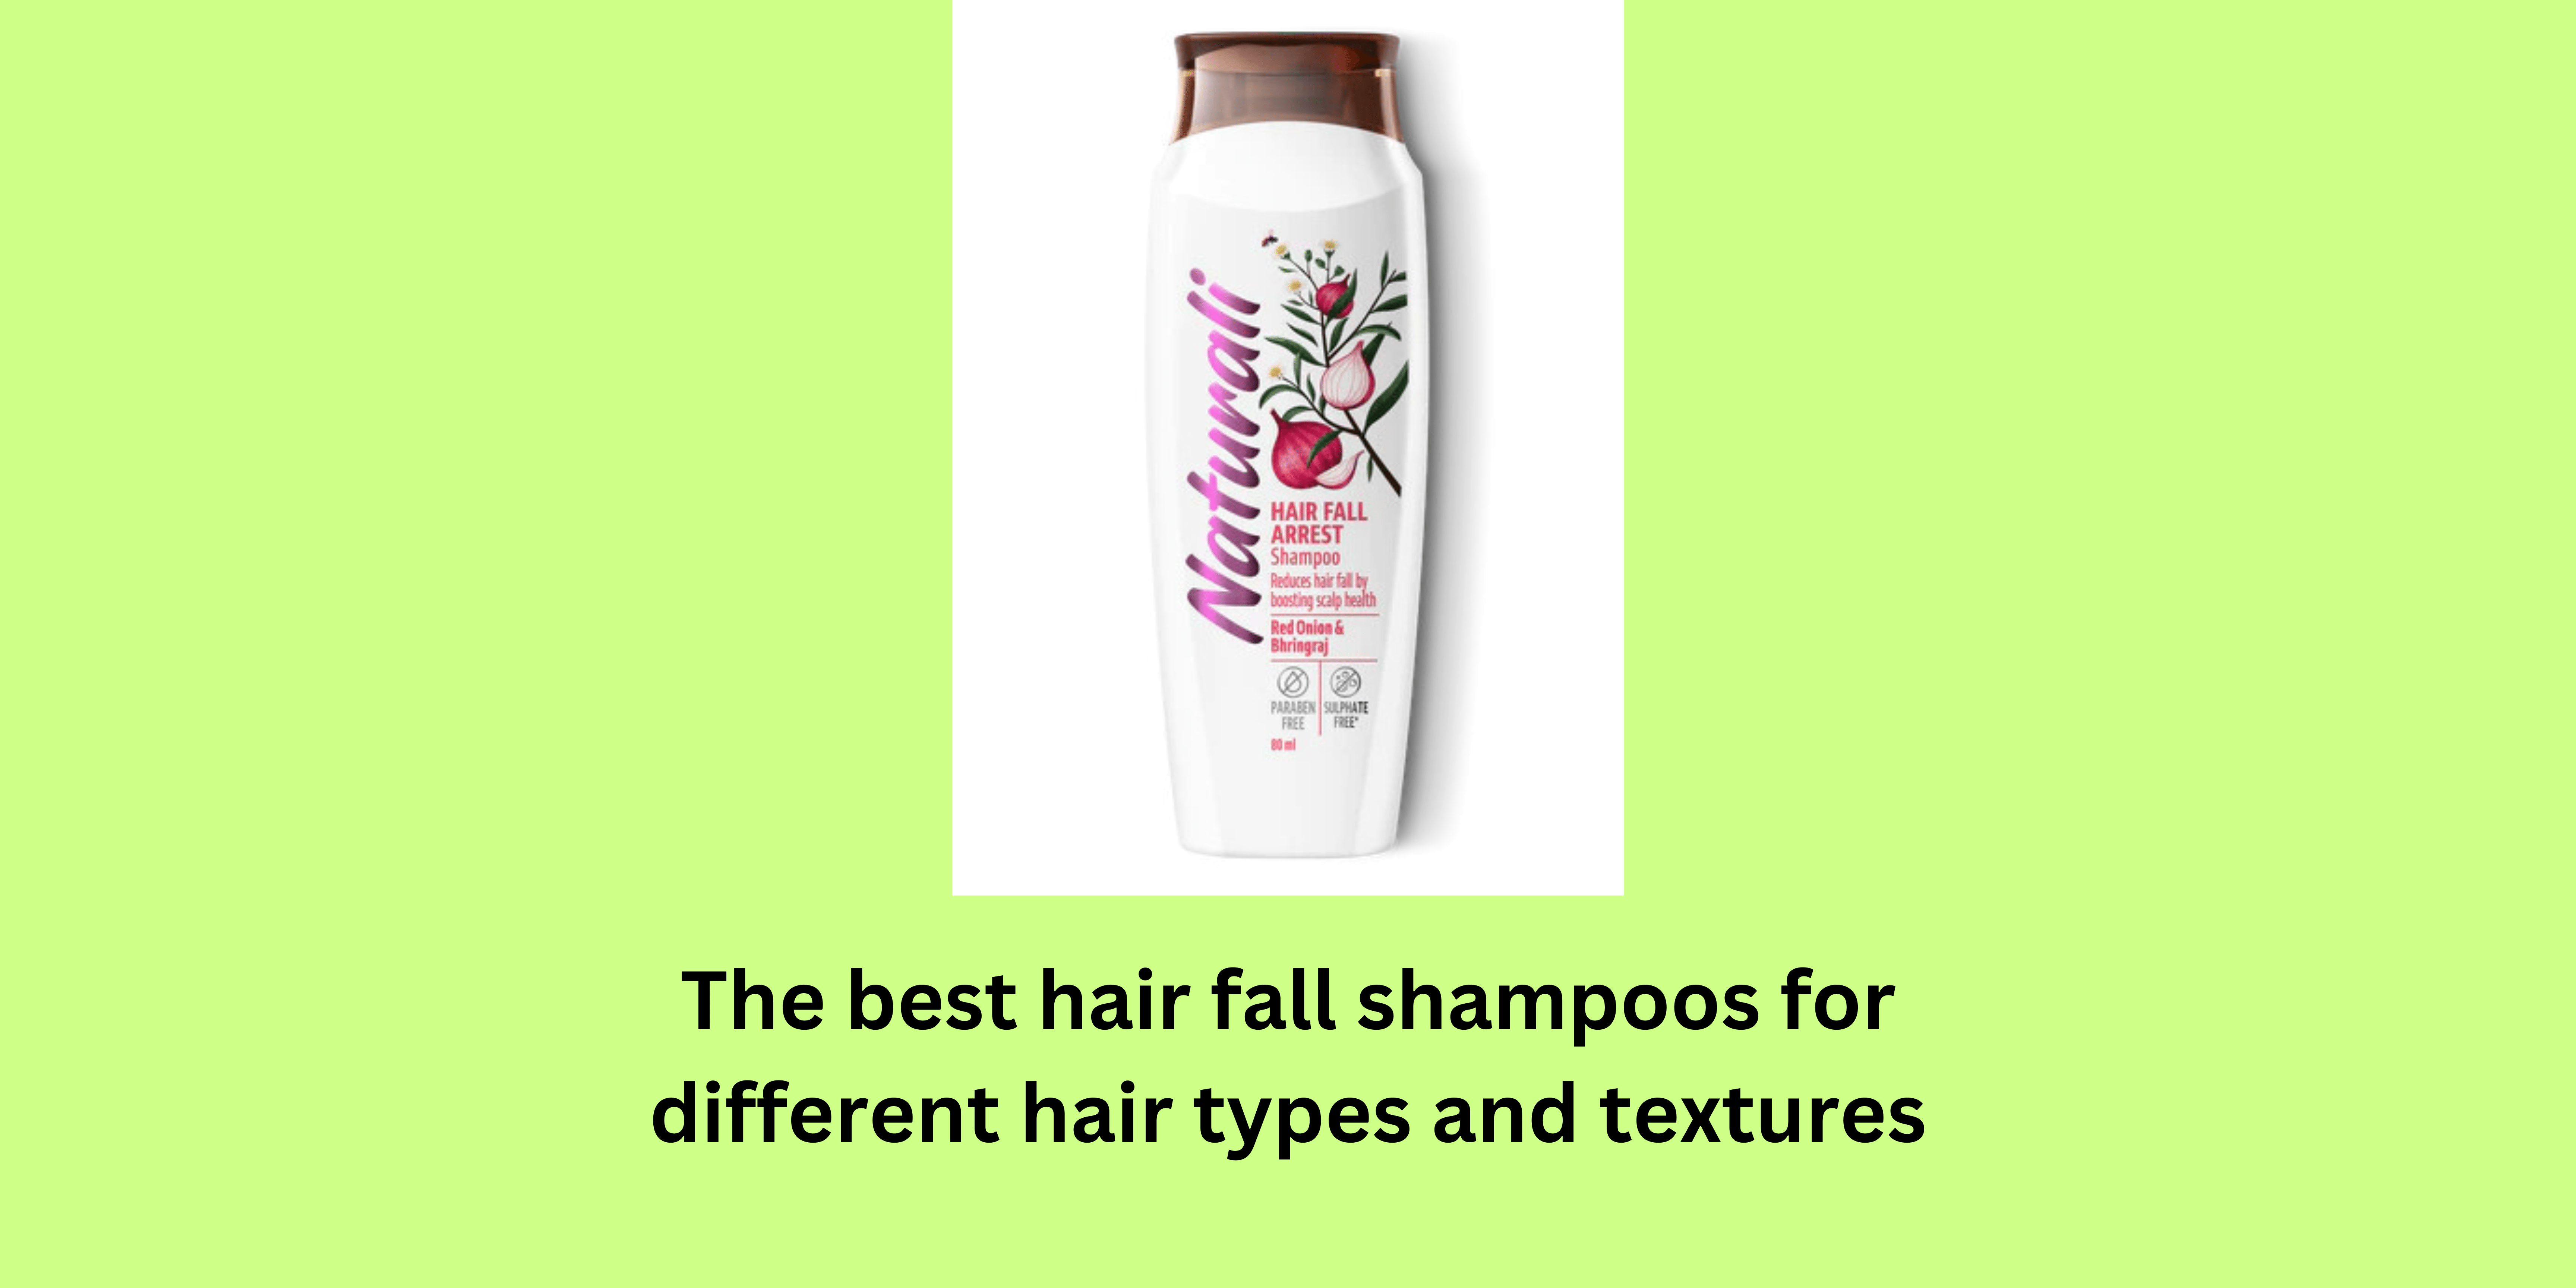 Best Hair Fall Shampoo for Different Hair Types and Textures